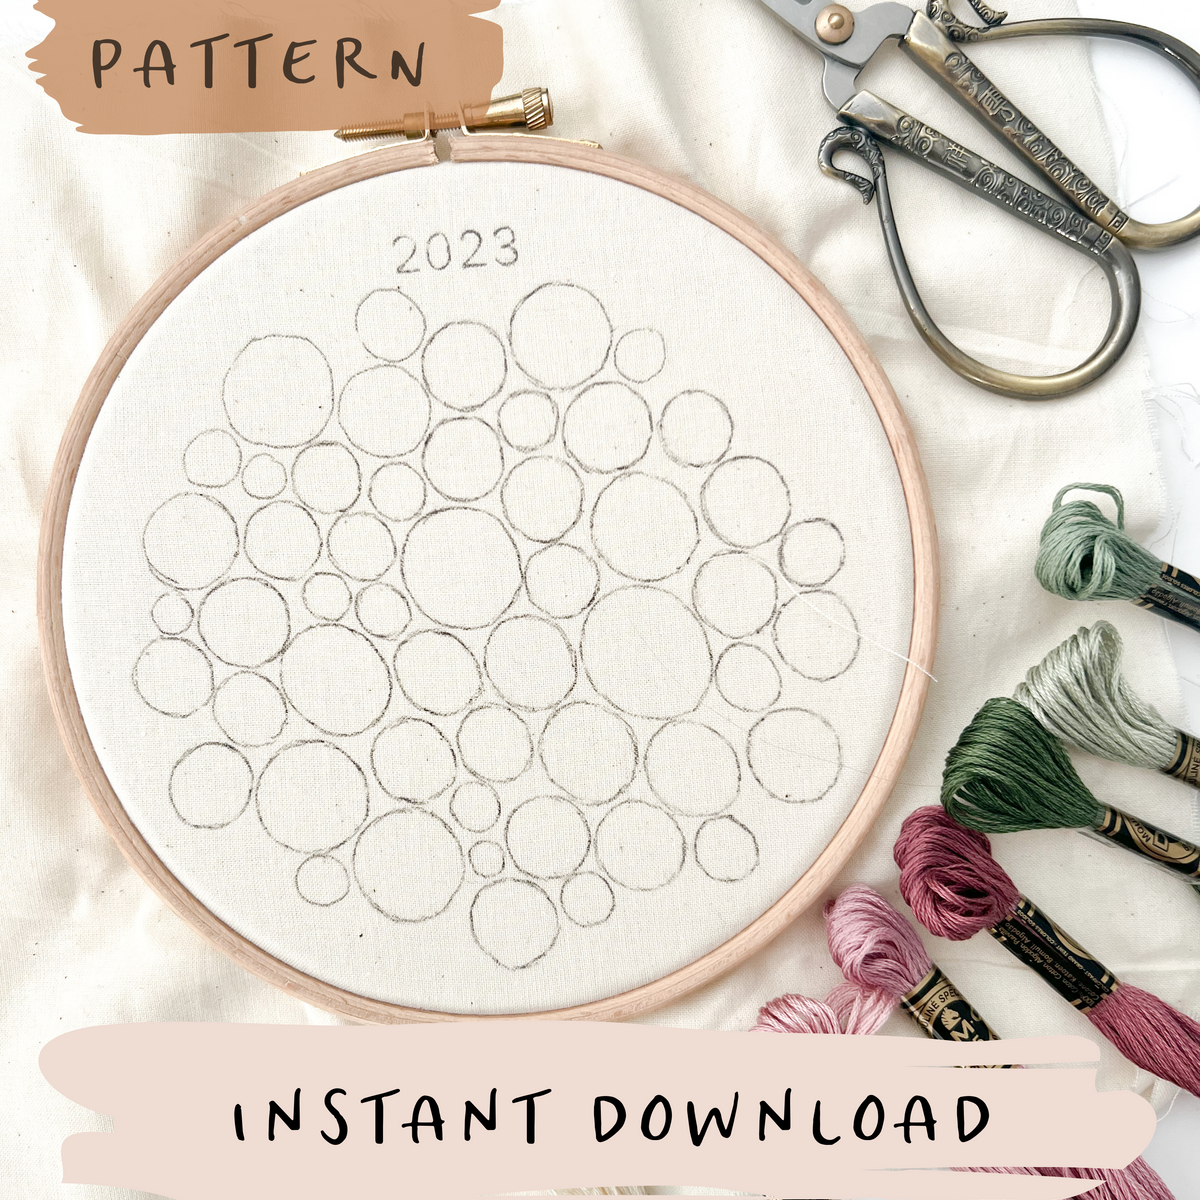 Embroidery Journal Update: June 2022! 